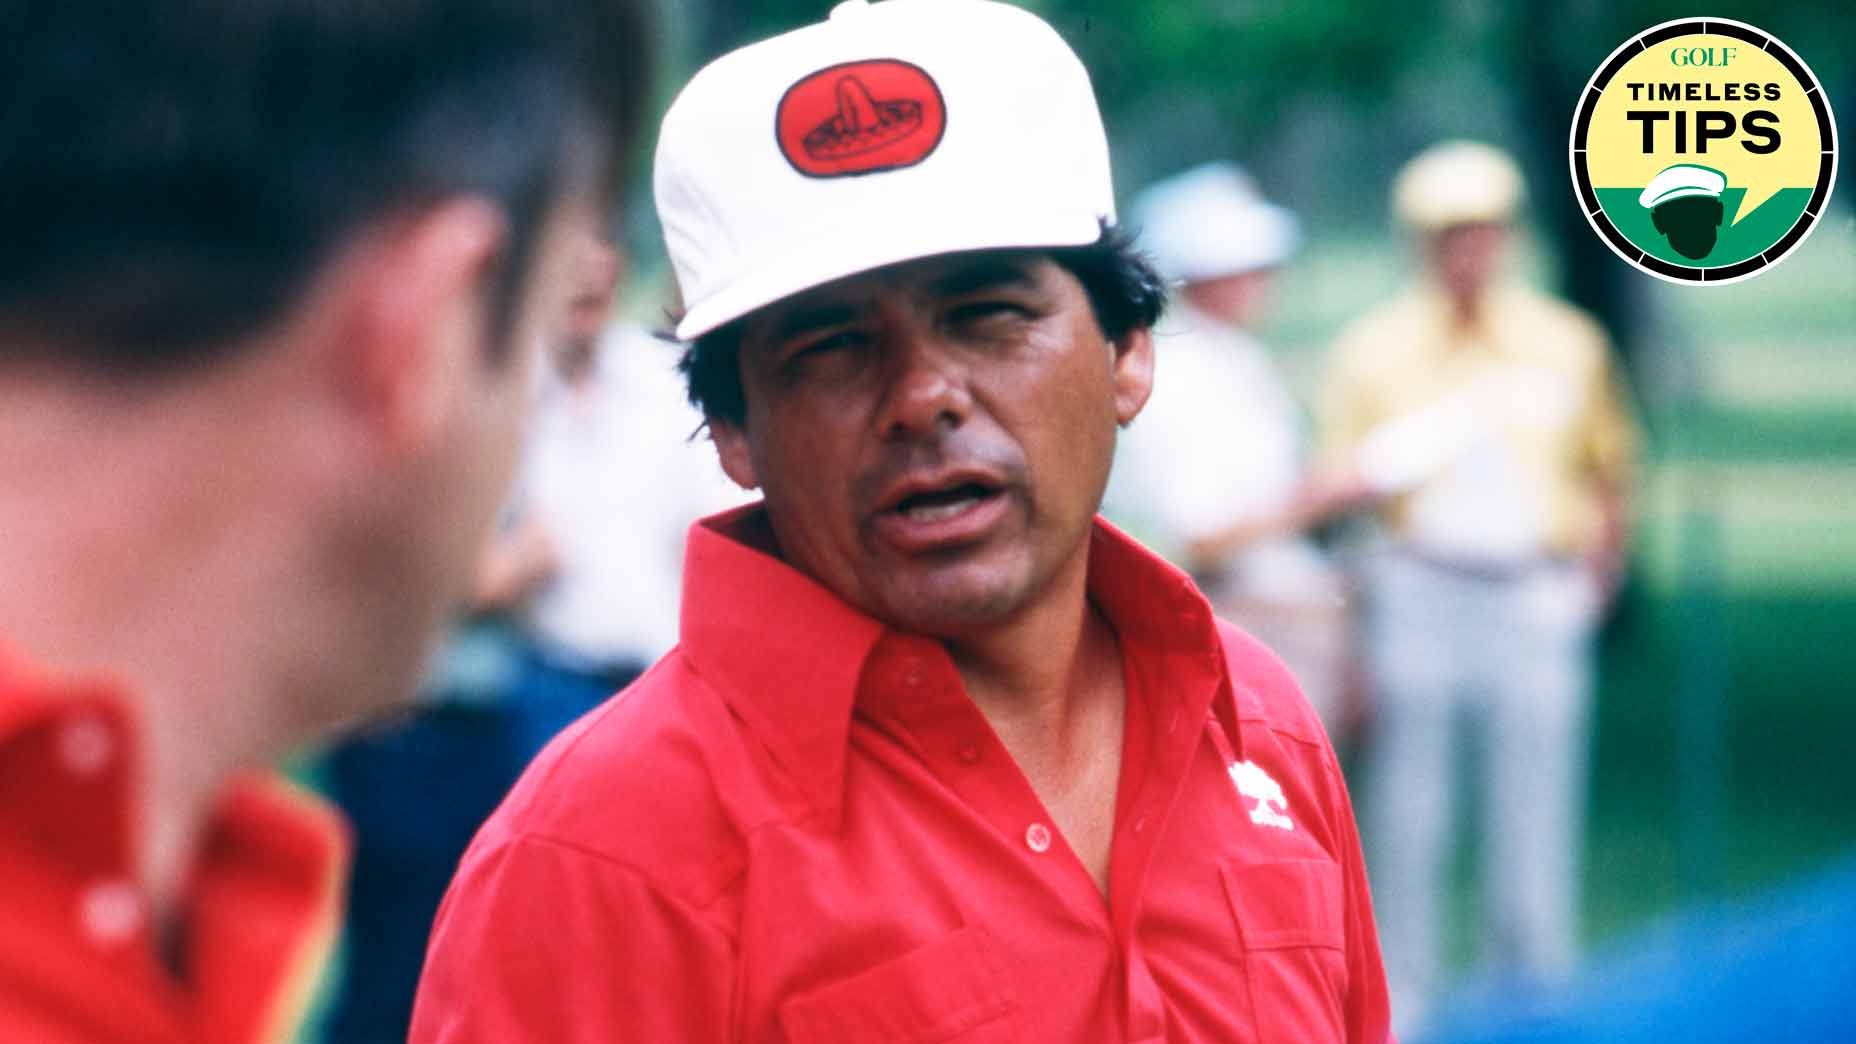 pro golfer lee trevino at a golf tournament in 1982.